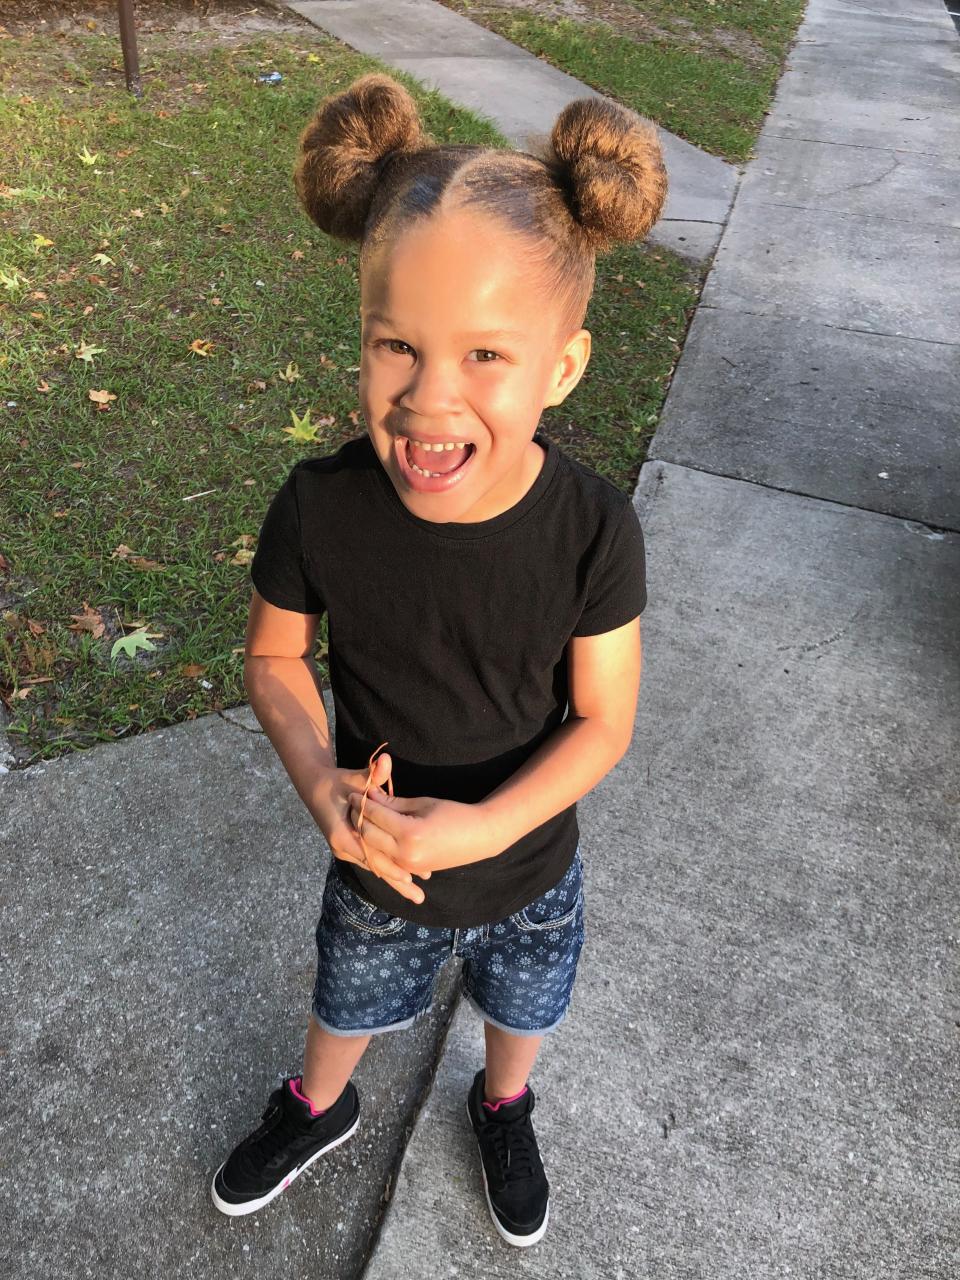 The mother of 6-year-old Nadia King plans to sue the Florida school district where a social worker invoked the state's Baker Act, placing the girl at a behavioral health center for 48 hours. | The Cochran Firm